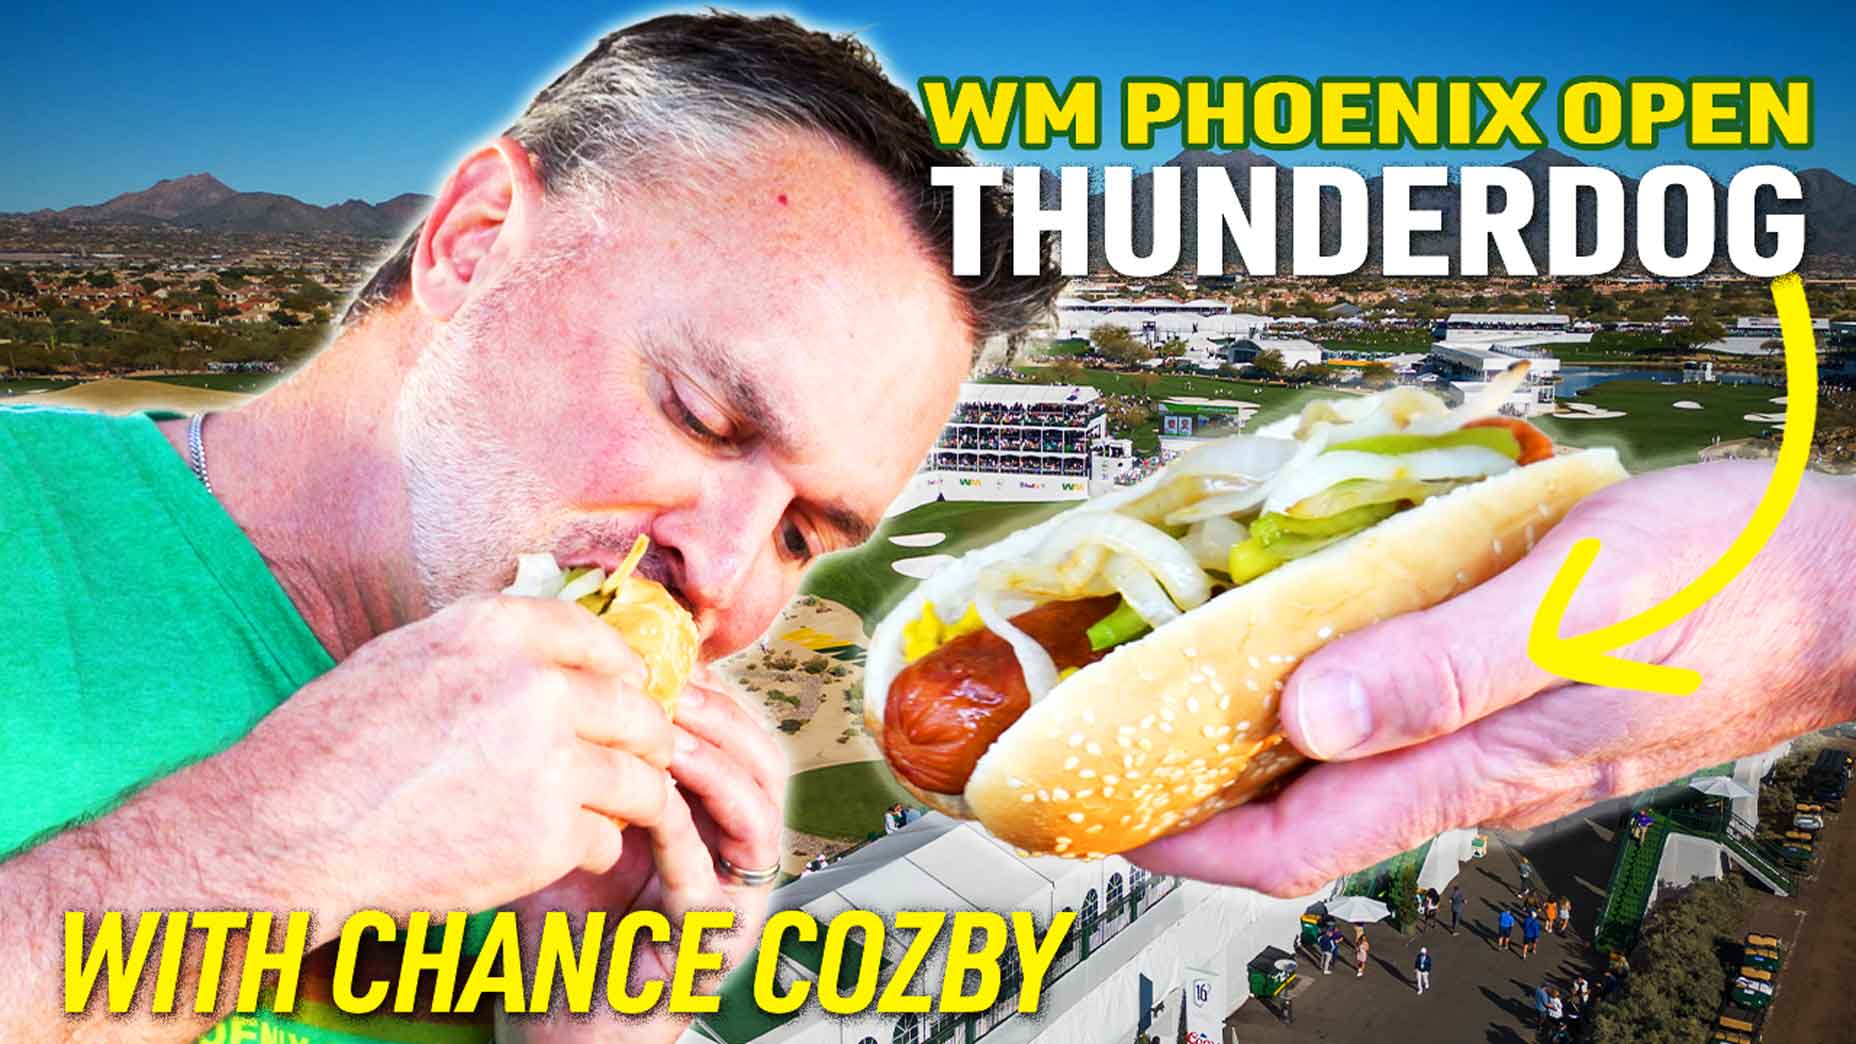 Chance Cozby eats the famous Thunderdog at the WM Phoenix Open.